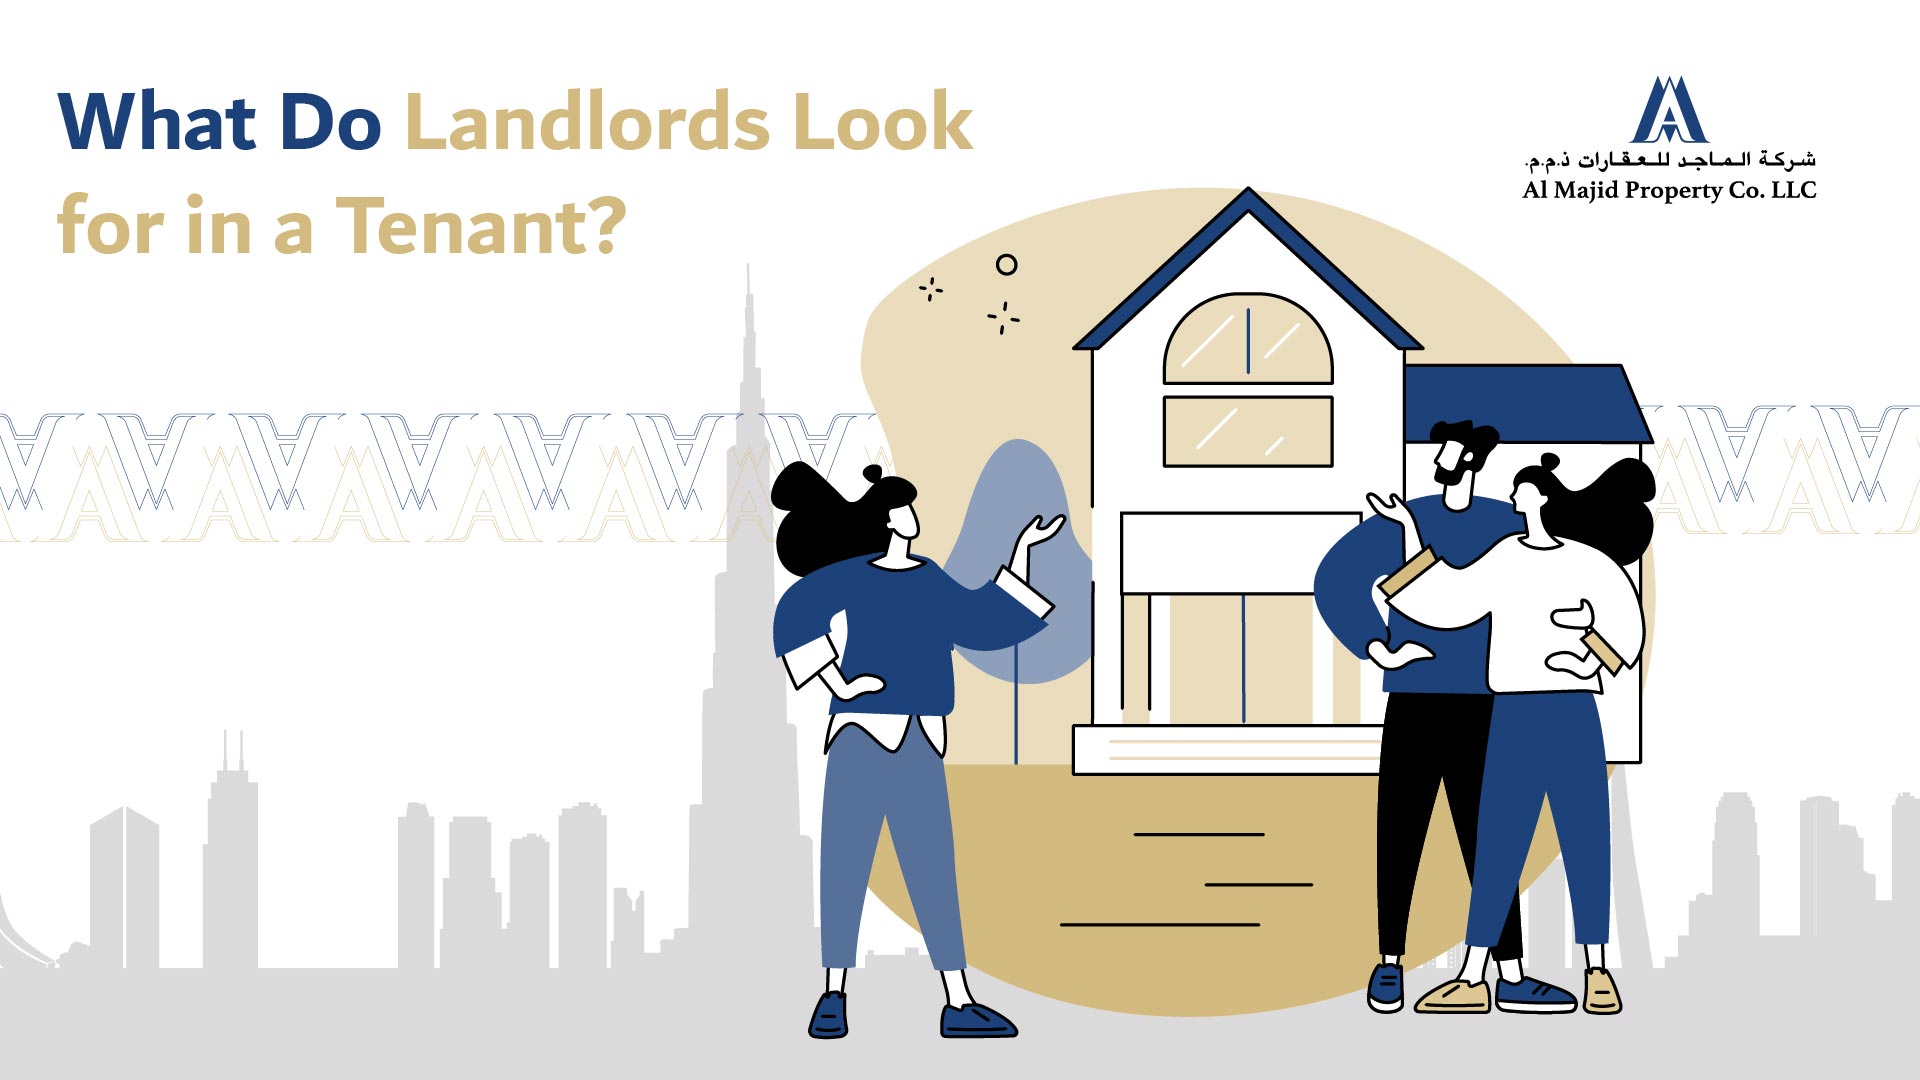 Landlords Look for in a Tenant